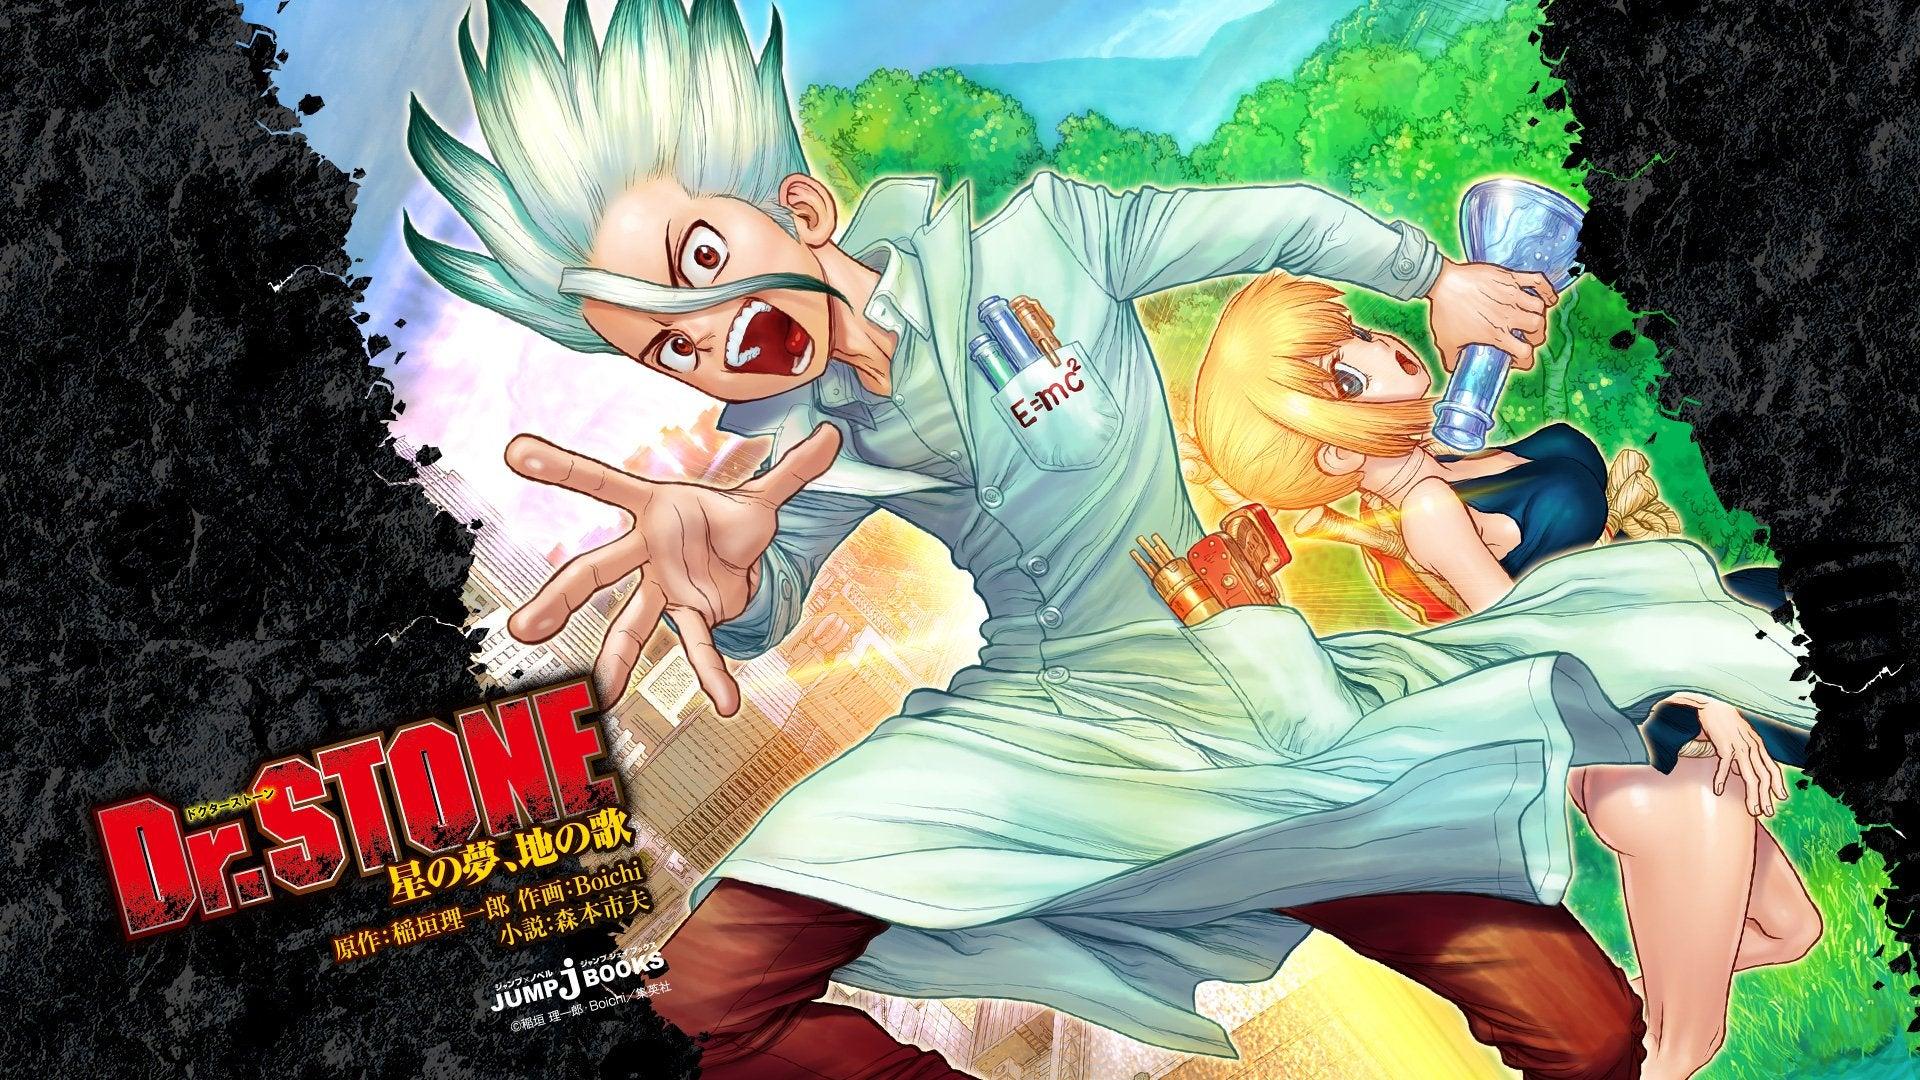 Jump j Books desktop and phone wallpaper for Dr. Stone Star's